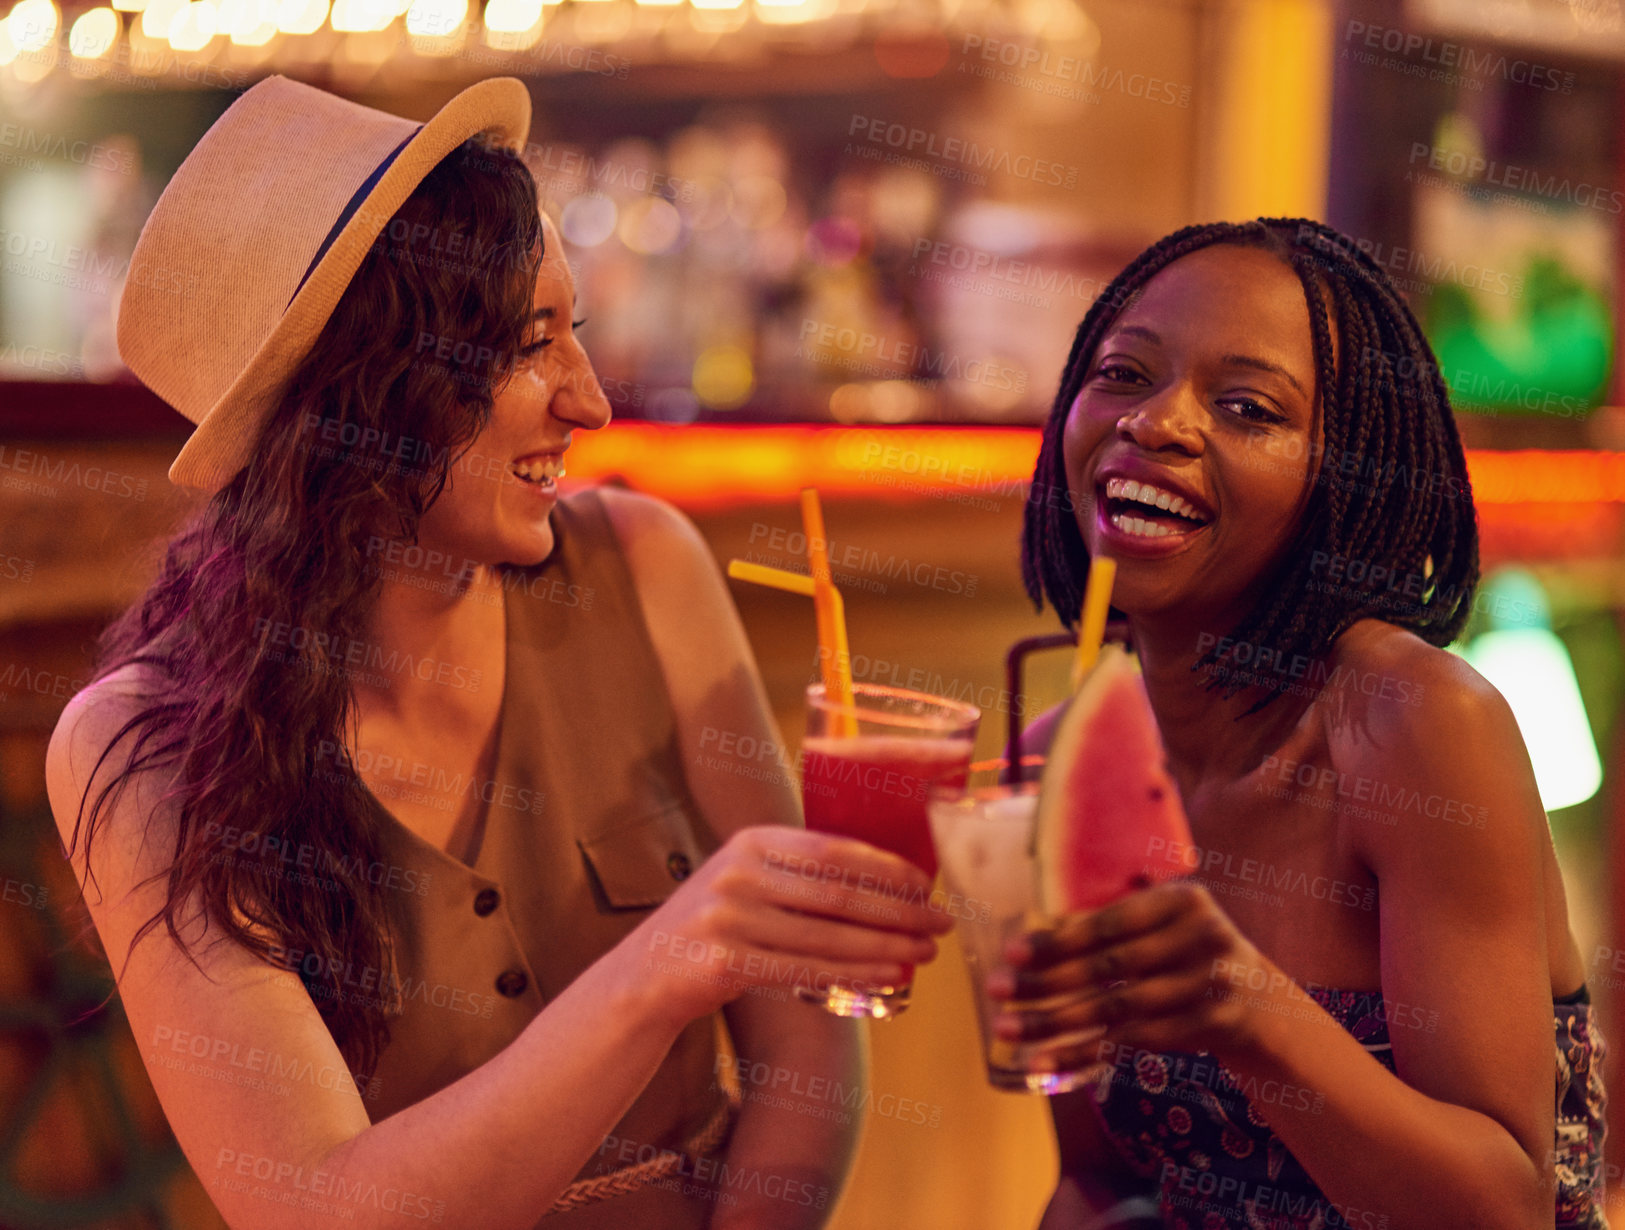 Buy stock photo Cropped shot of two young friends having drinks together in a bar